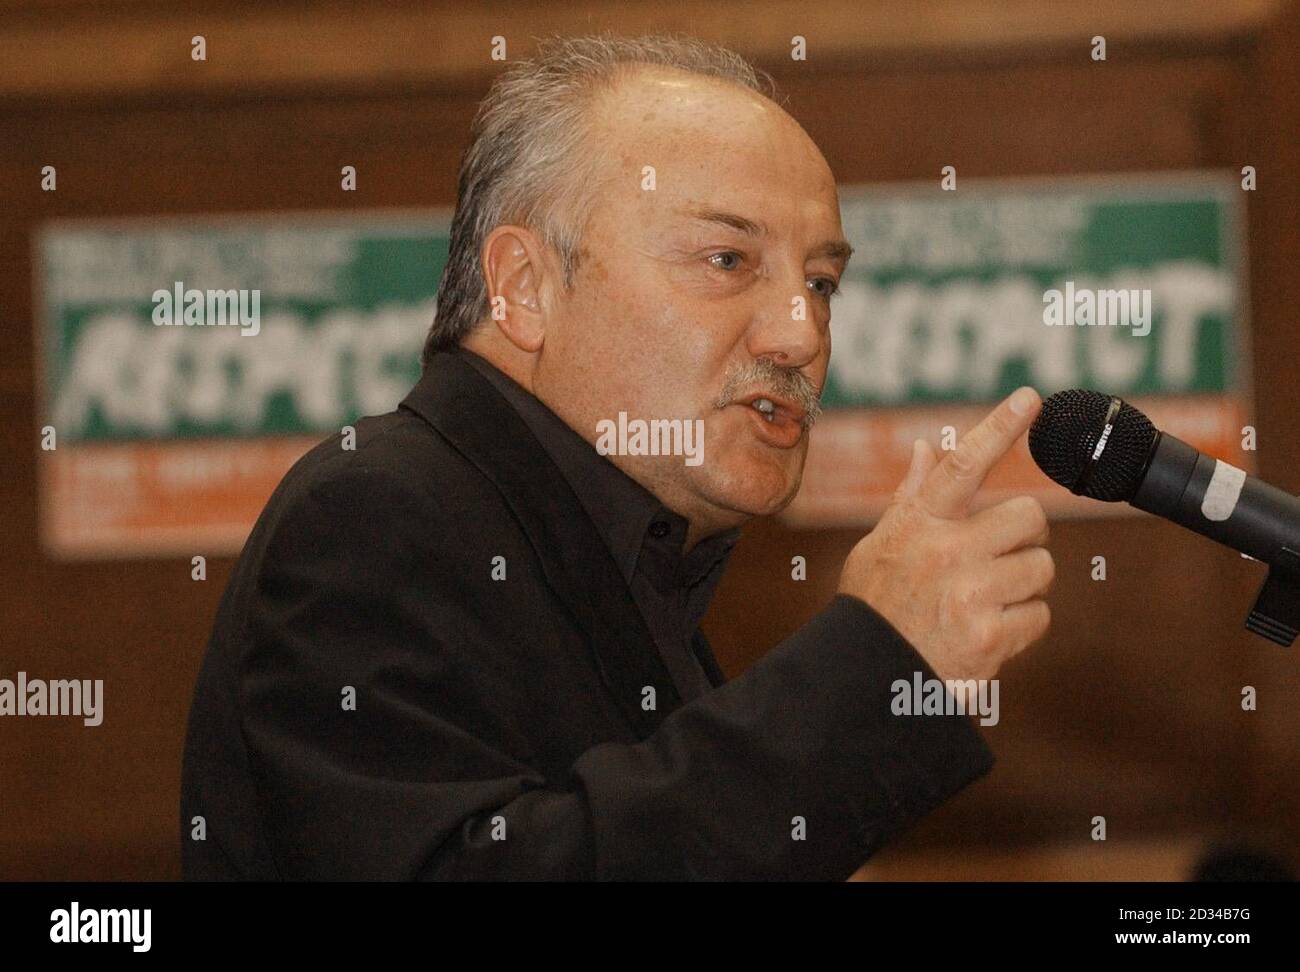 Respect MP George Galloway speaks at a party rally a day after his ferocious showdown with US senators. Hundreds turned up at a meeting in London to celebrate his general election victory over Labour's Oona King. He was hailed as the 'man of the moment' after returning from Washington today. Stock Photo